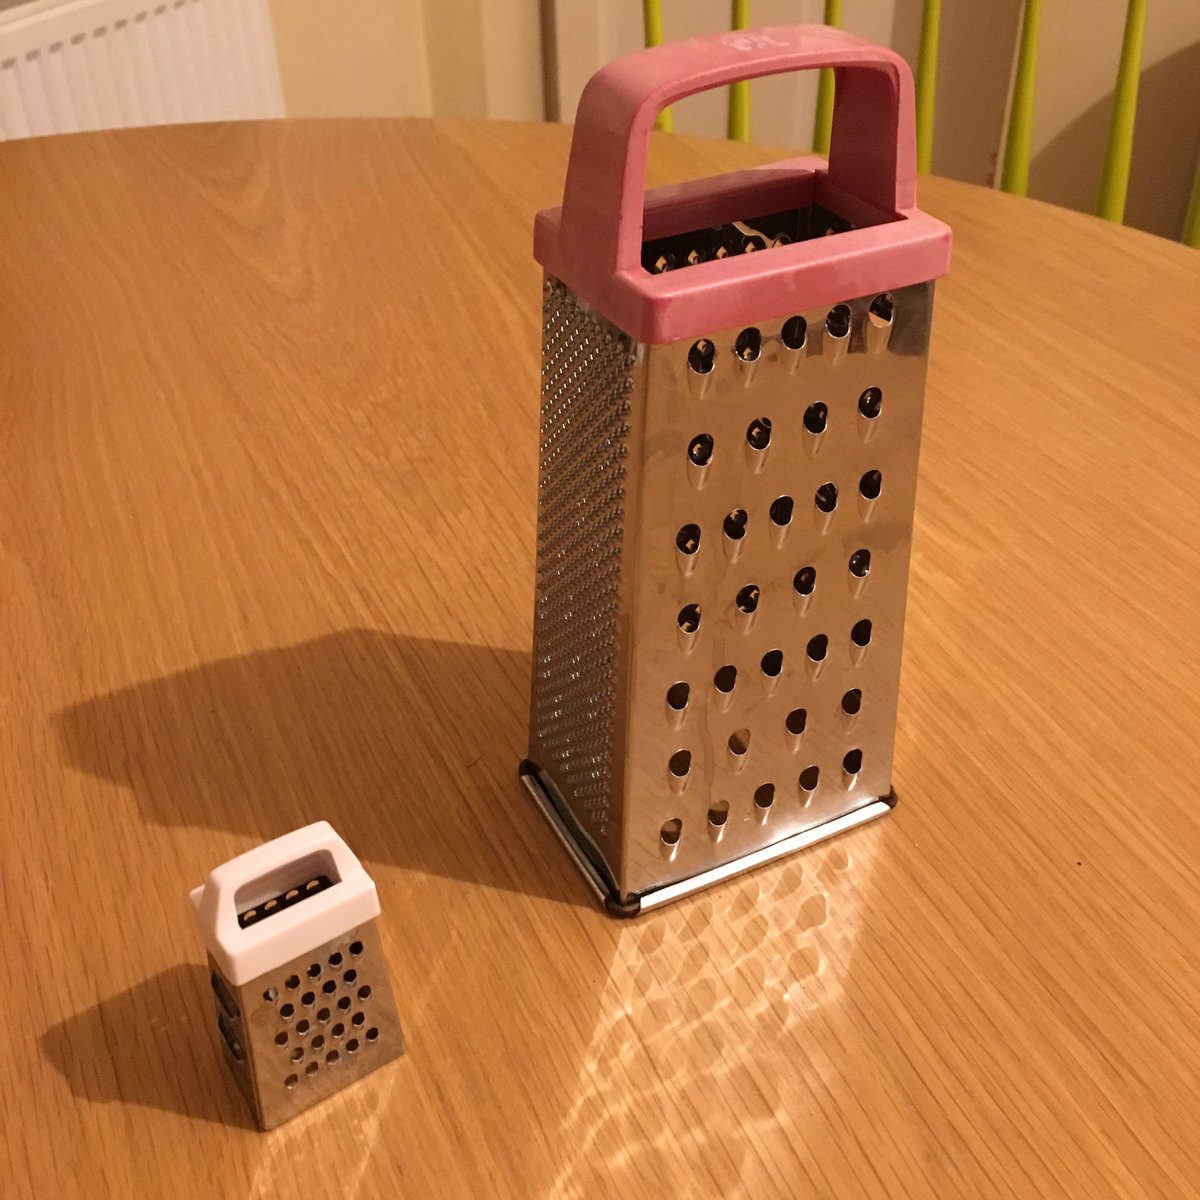 Amazing how grater technology has developed. My current grater (left)and an original 80s grater, the size of a brick!